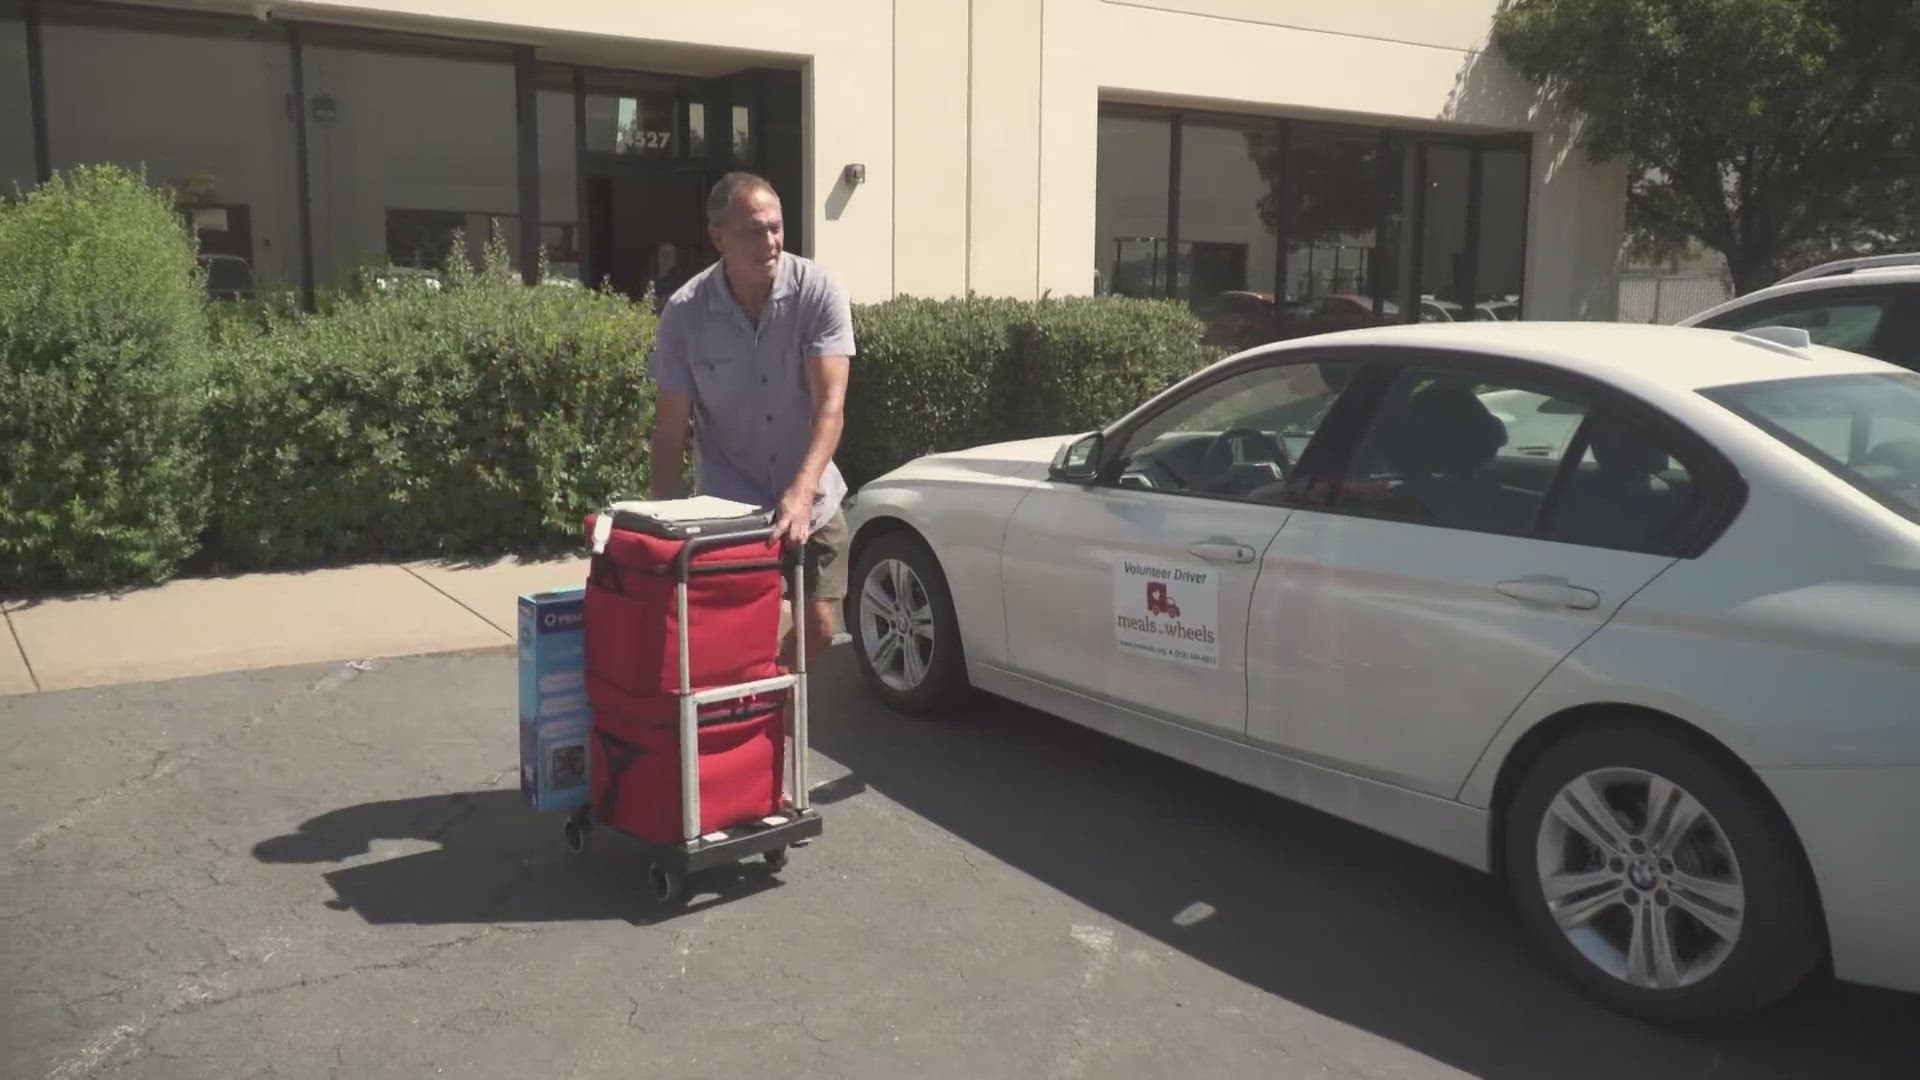 Meals on Wheels protecting seniors from extreme heat in Sacramento County